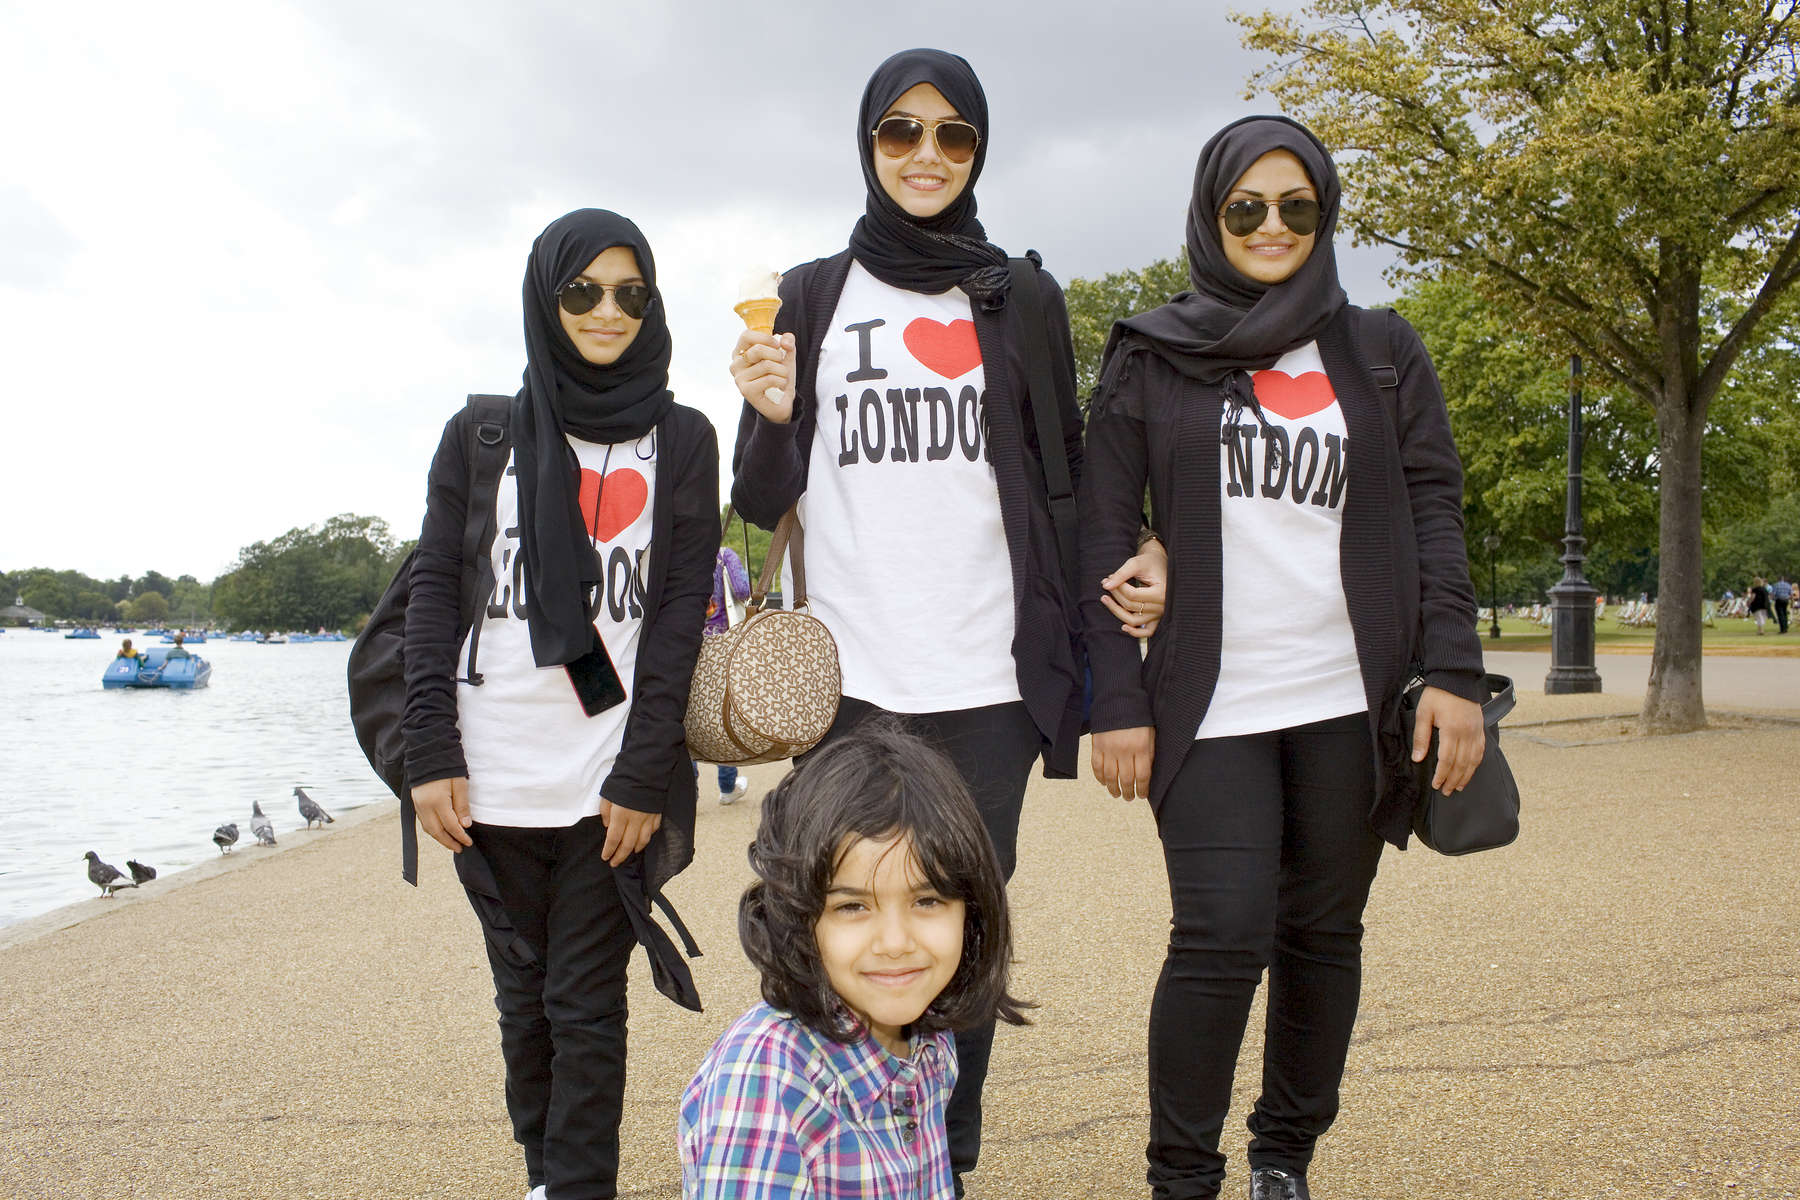 16-year-old Salma Mohammed, centre, is one Saudi Arabian who likes to visit the Serpentine lake in Hyde Park.Arabs have been visiting London for centuries and around 300,000 Arabs have chosen to make the capital their home and a further half a million throughout the UK. The number swells significantly from visitors during the summer. Saudi Arabians spend the most on property in London choosing Belgravia, Kenington, Knightsbridge and Holland Park. Arab culture continues to increase in visibility throughout the capital as integration into this most transient of city's continues.©Peter Dench/Reportage by Getty Images